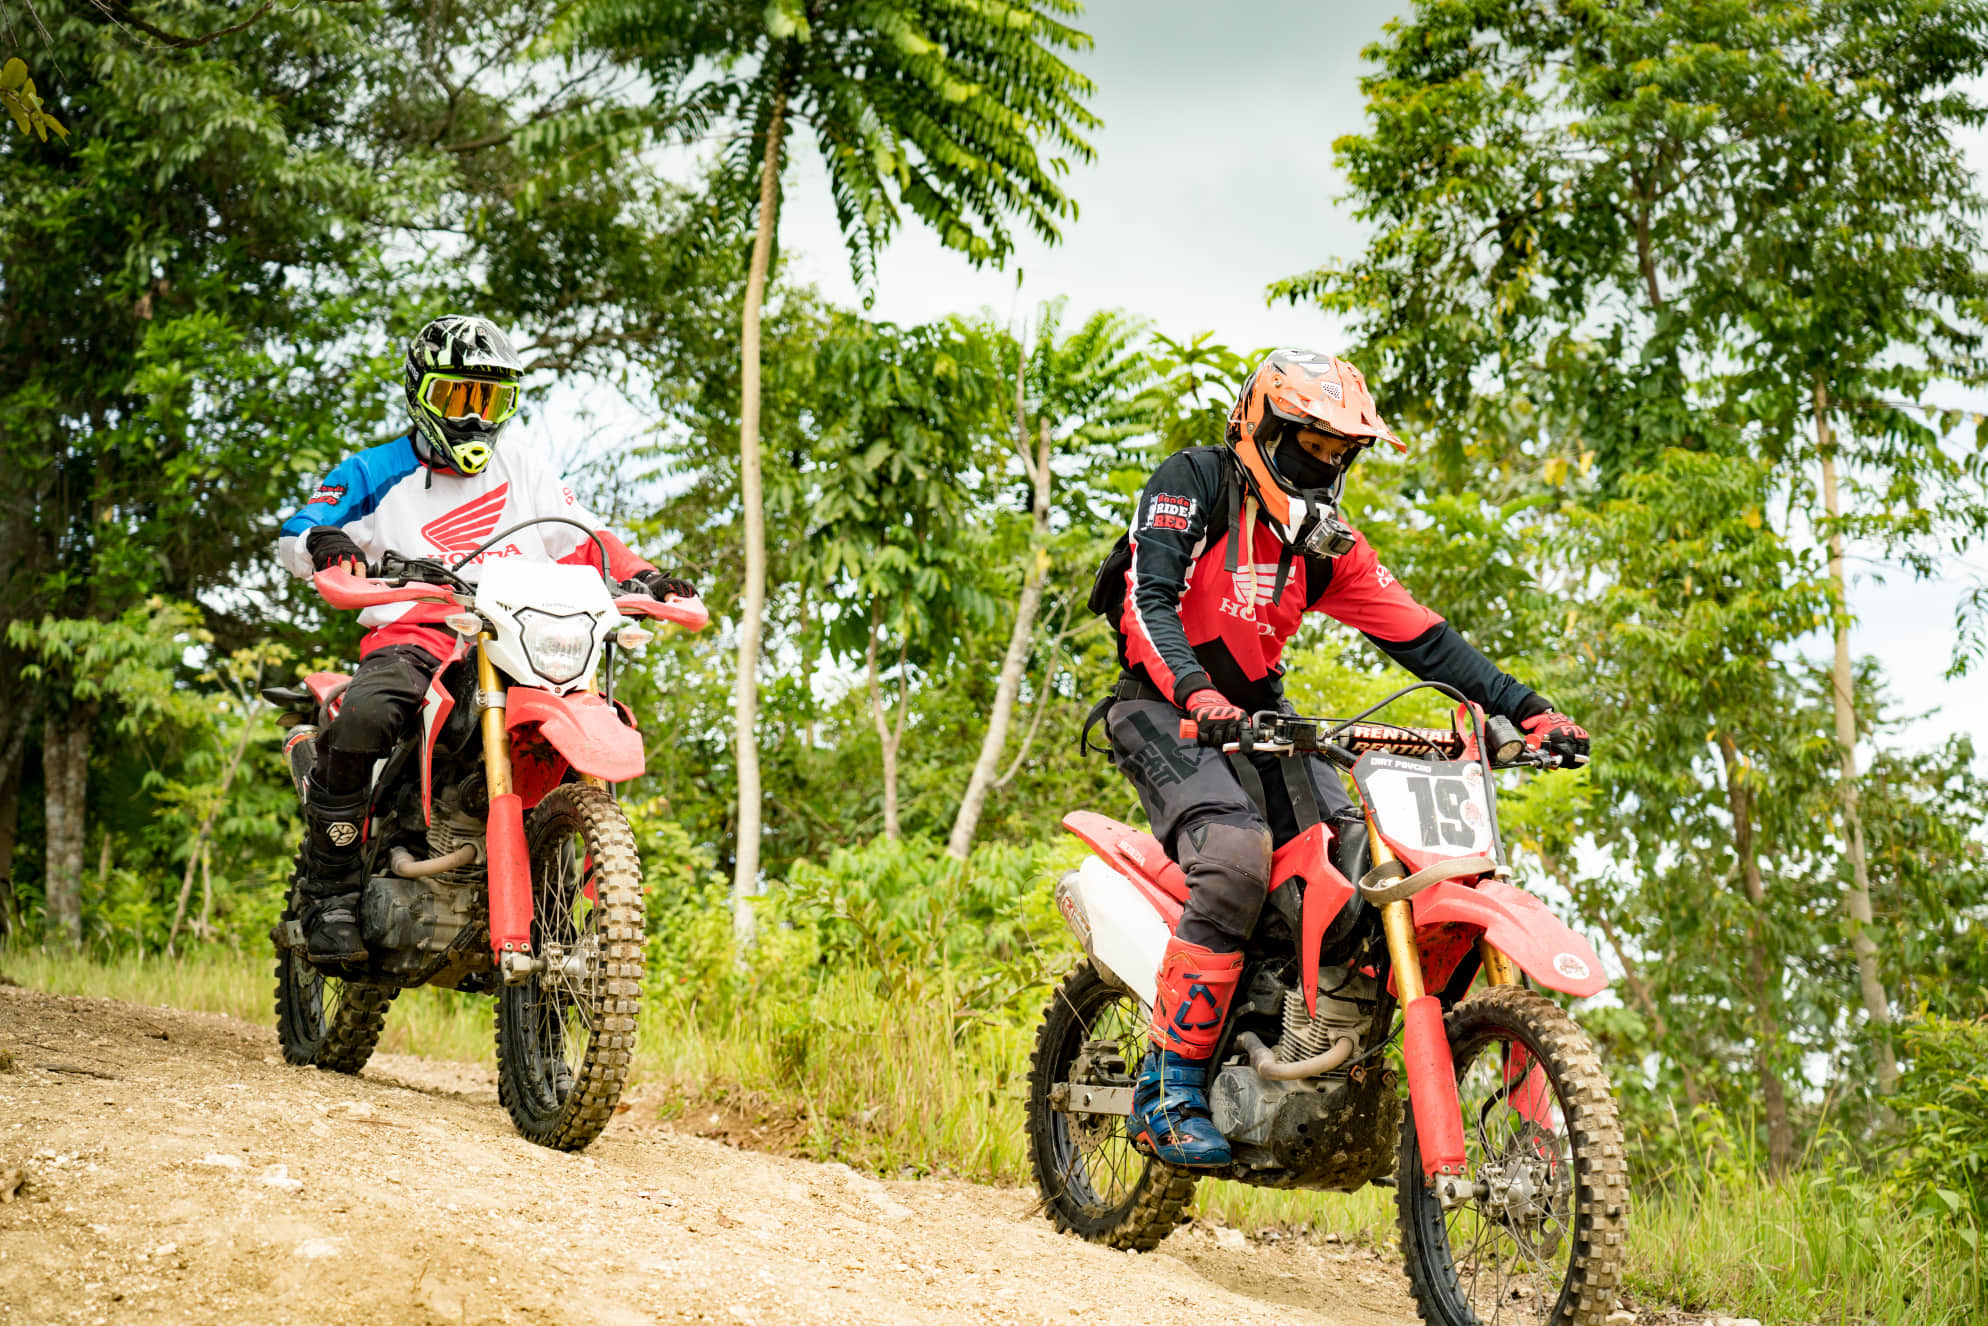 Honda conquers Davao with a thrilling Ride Red experience